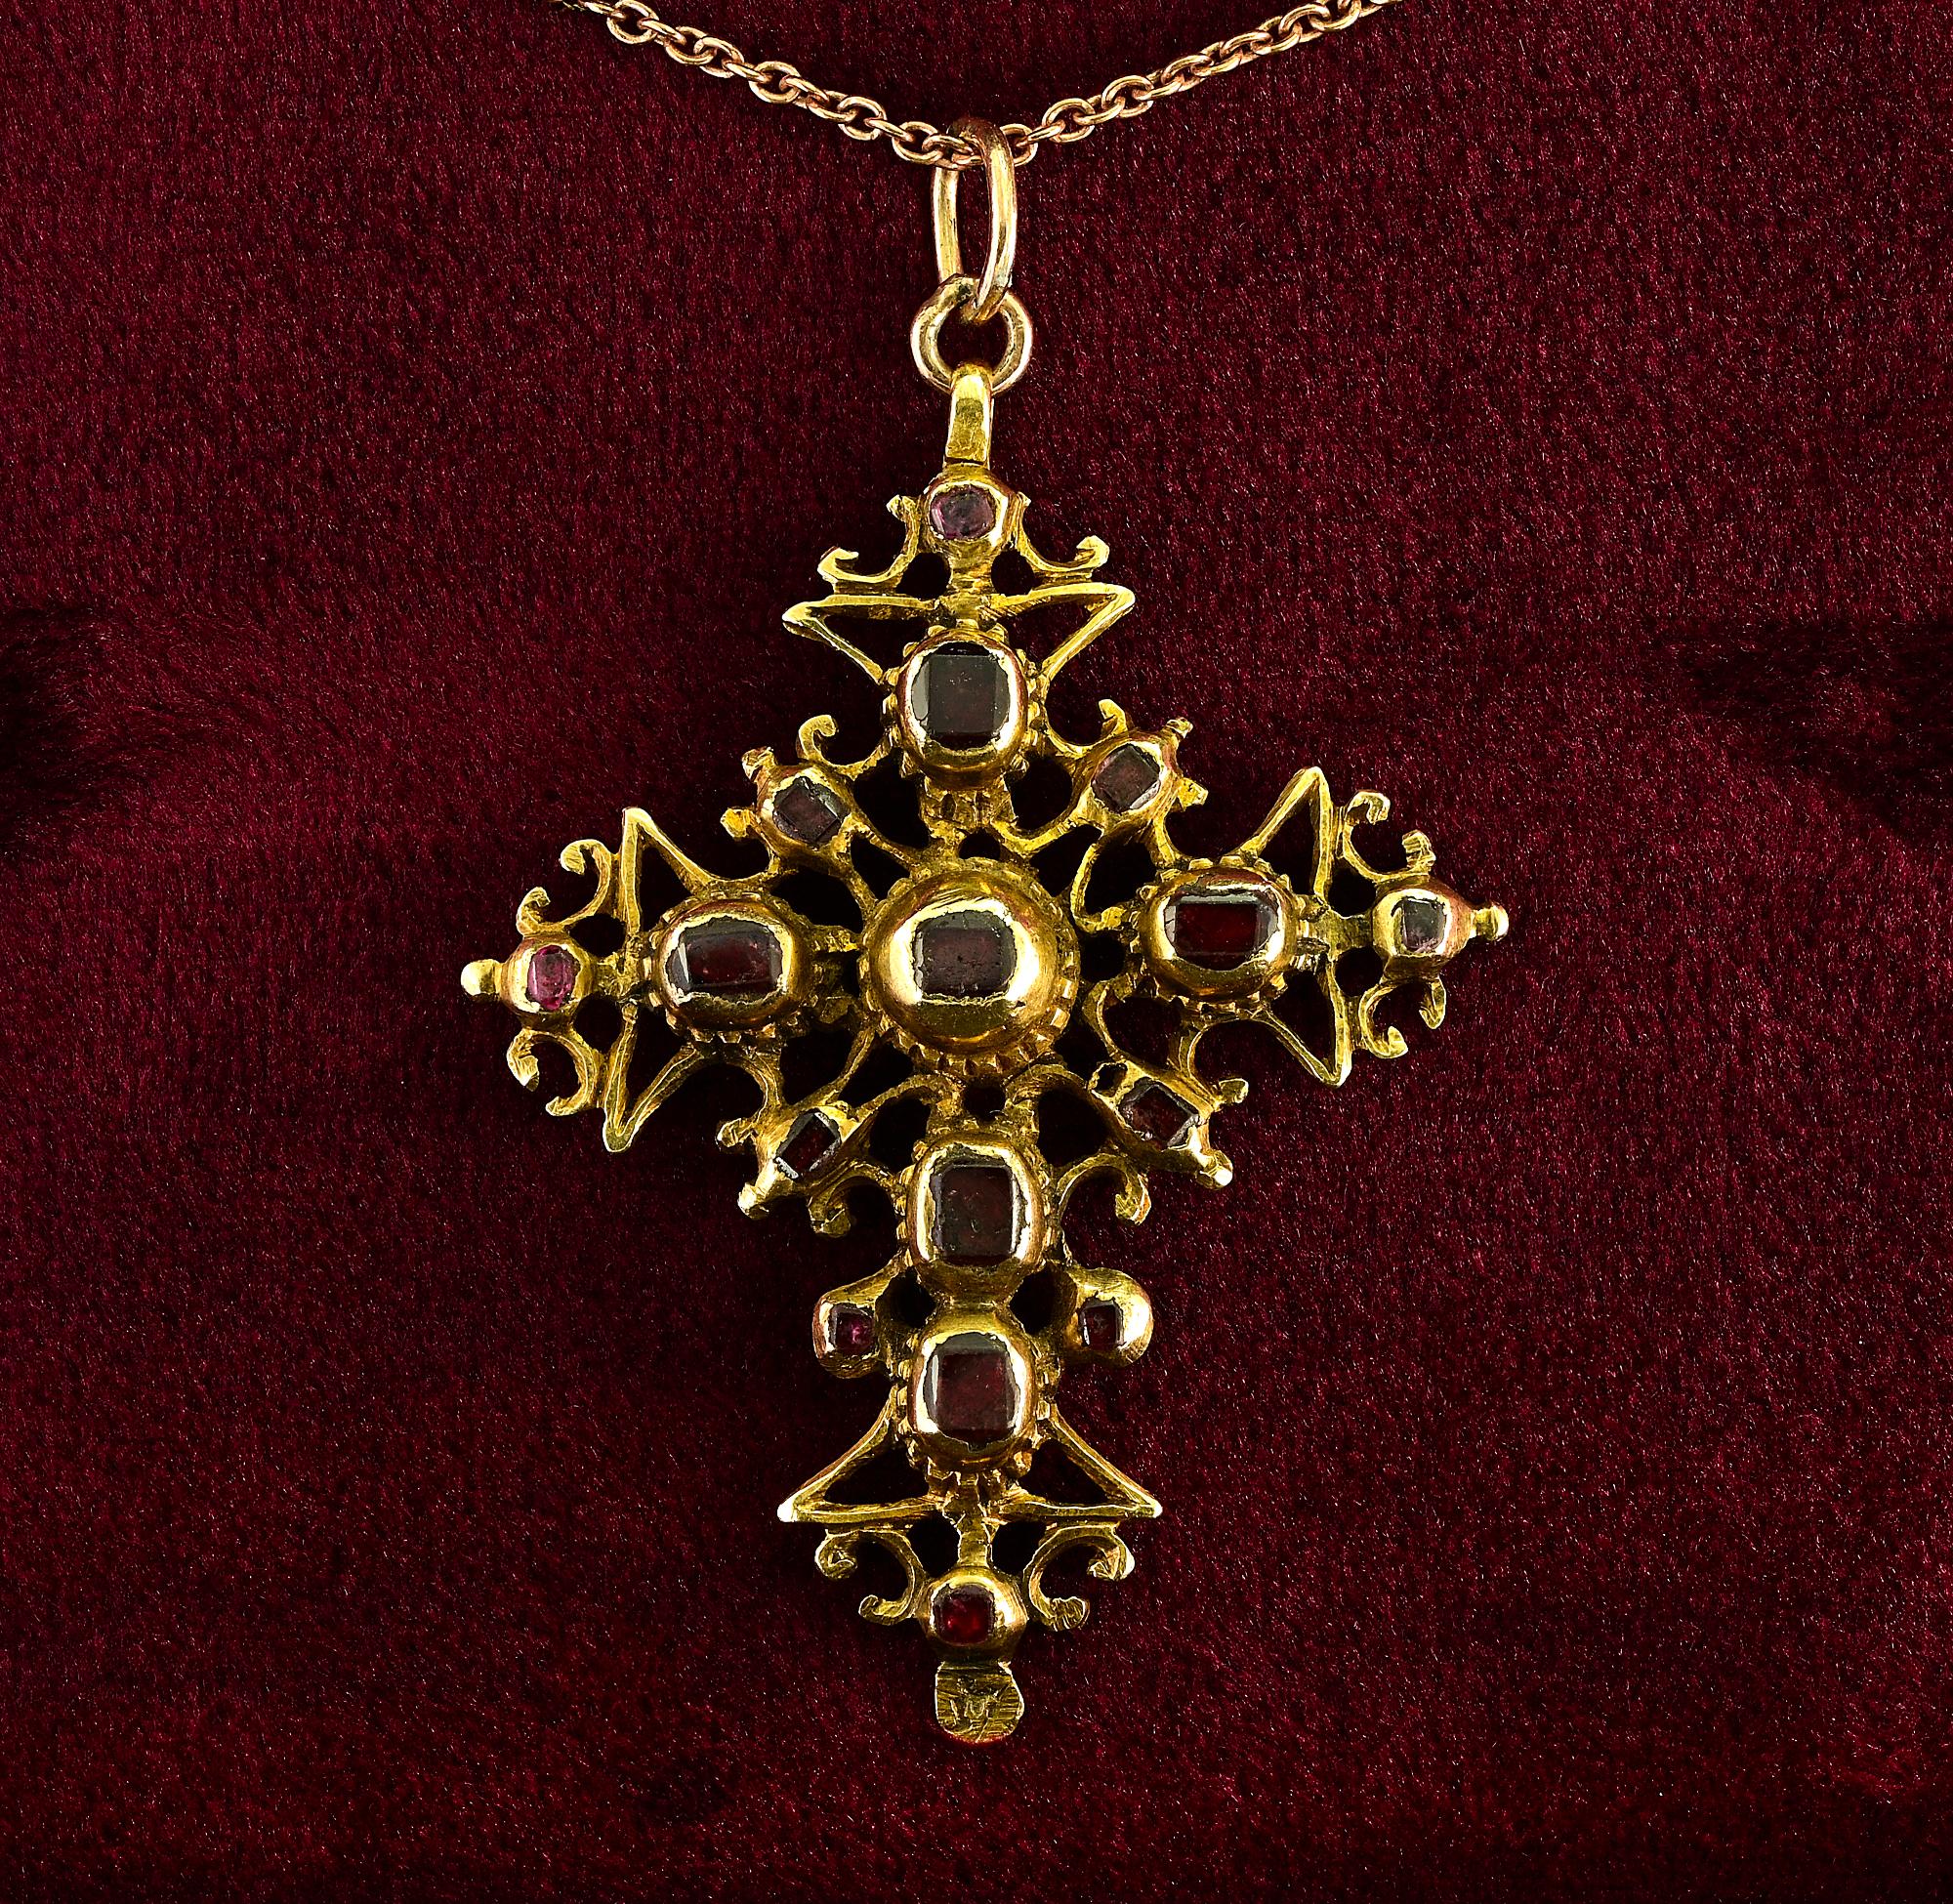 This beautiful antique cross is Georgian era 1740 ca – Possibly French from the hallmarks
Superb 18 KT past artwork of the era with rare design and rich back details
Adorned with a selection of table cut natural Garnets complemented by six natural